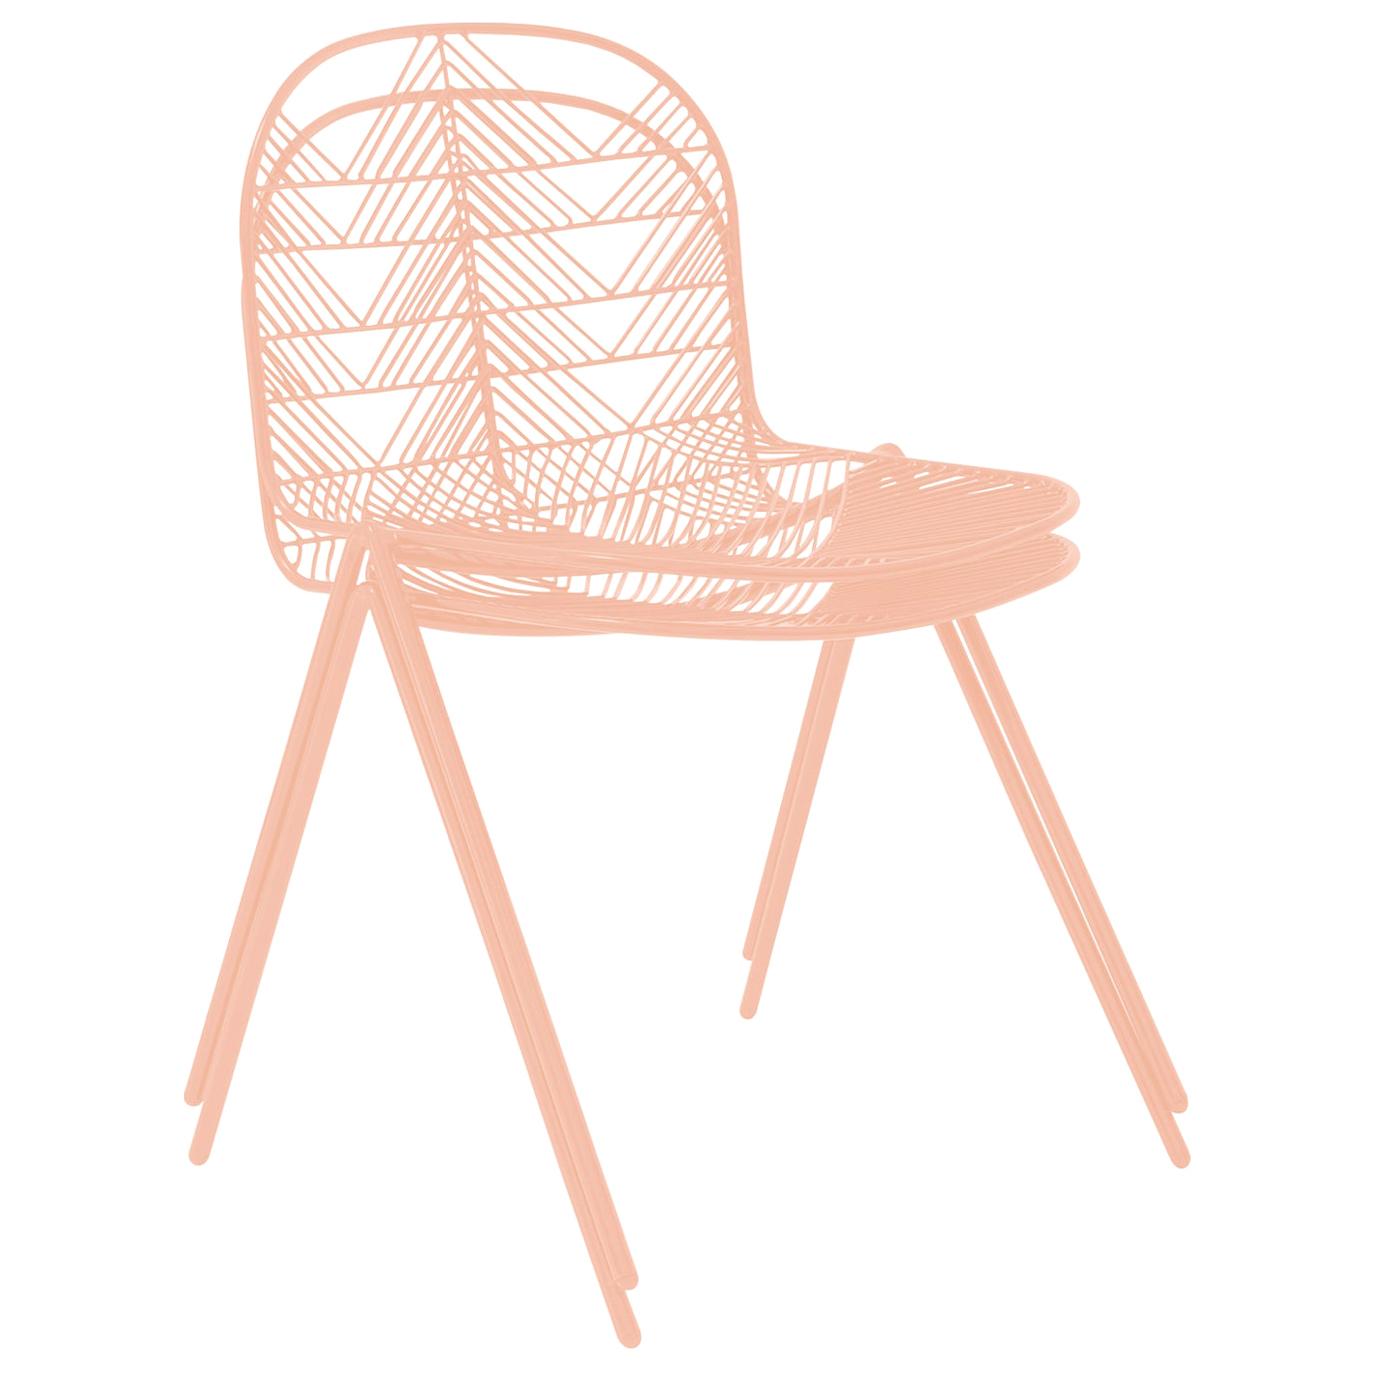 Minimalist Stacking Wire Chair, Modern Side Chair by Bend Goods in Peachy Pink